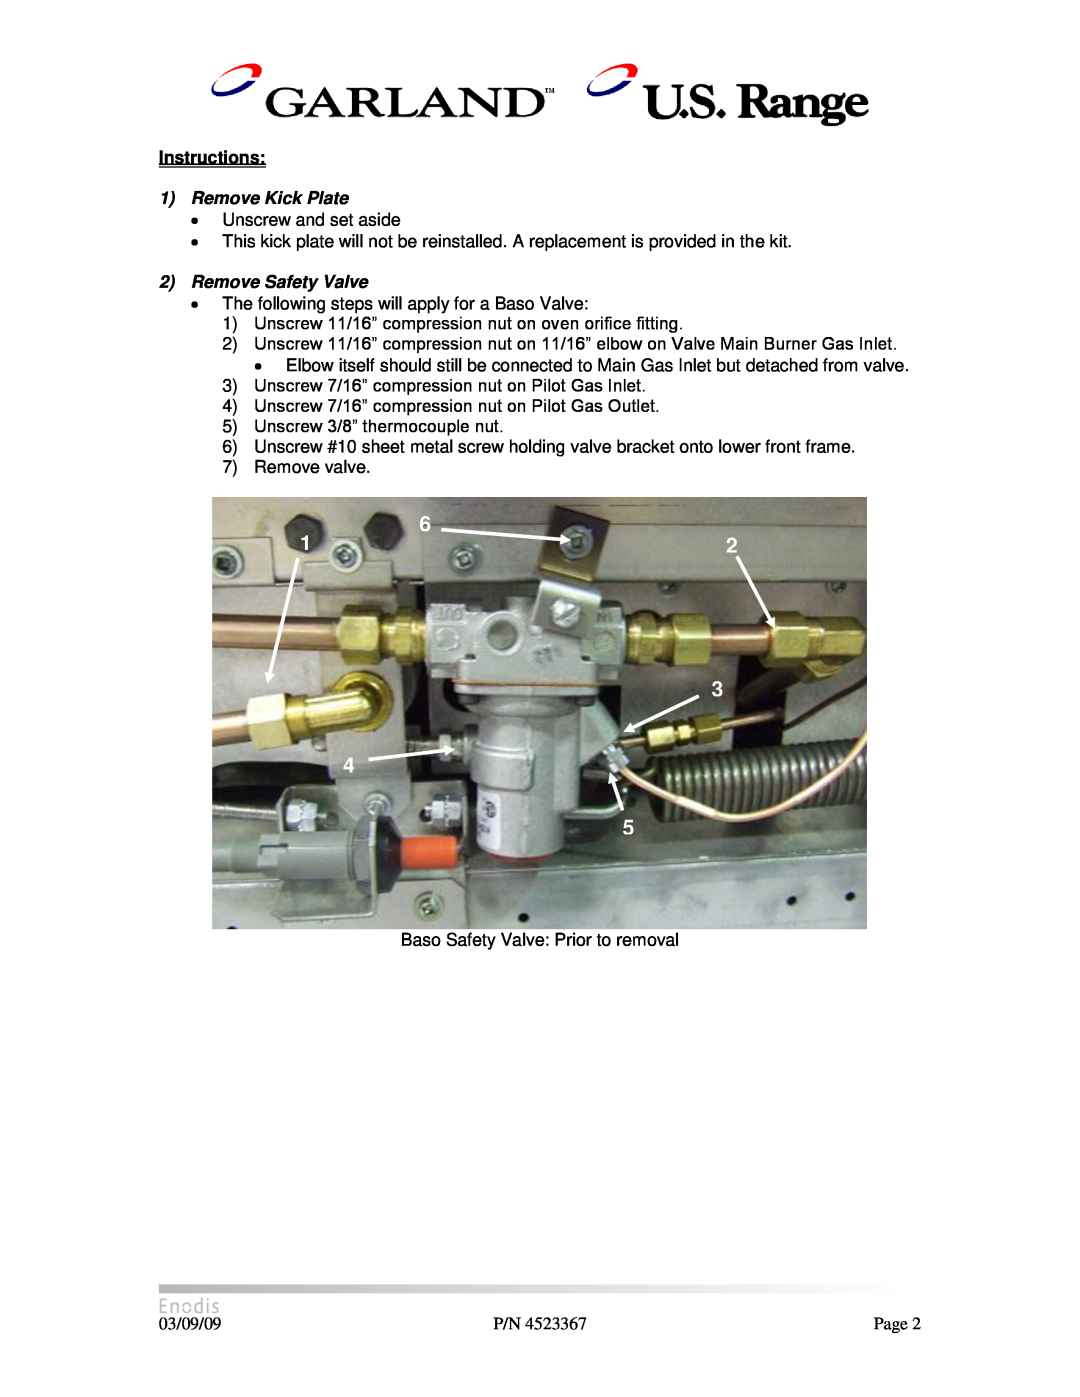 Garland H280 manual Instructions, Remove Kick Plate, Remove Safety Valve 